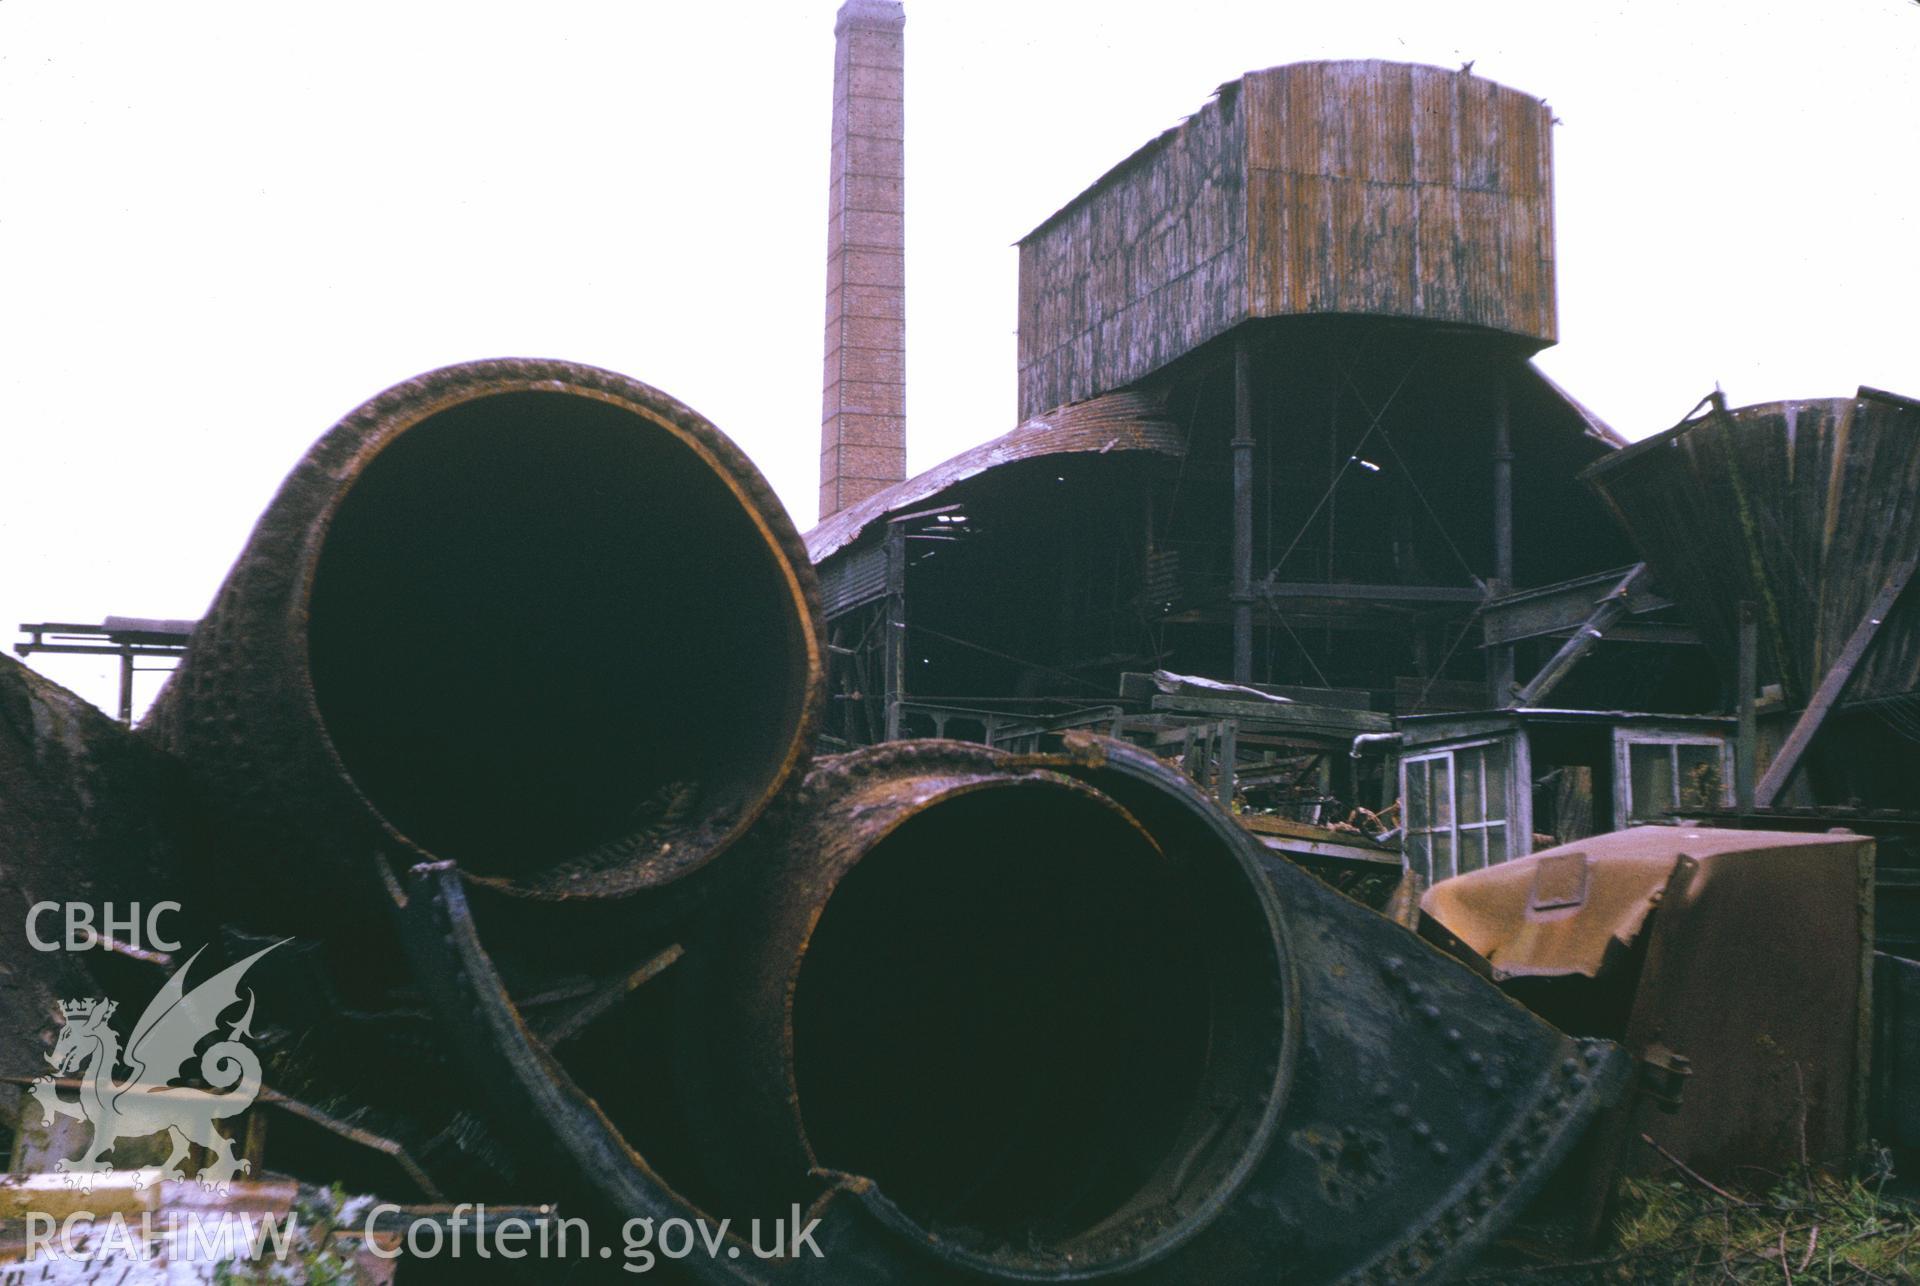 35mm colour slide showing the South Engine at Kidwelly Tin-Plate Works, Carmarthenshire, by Dylan Roberts.